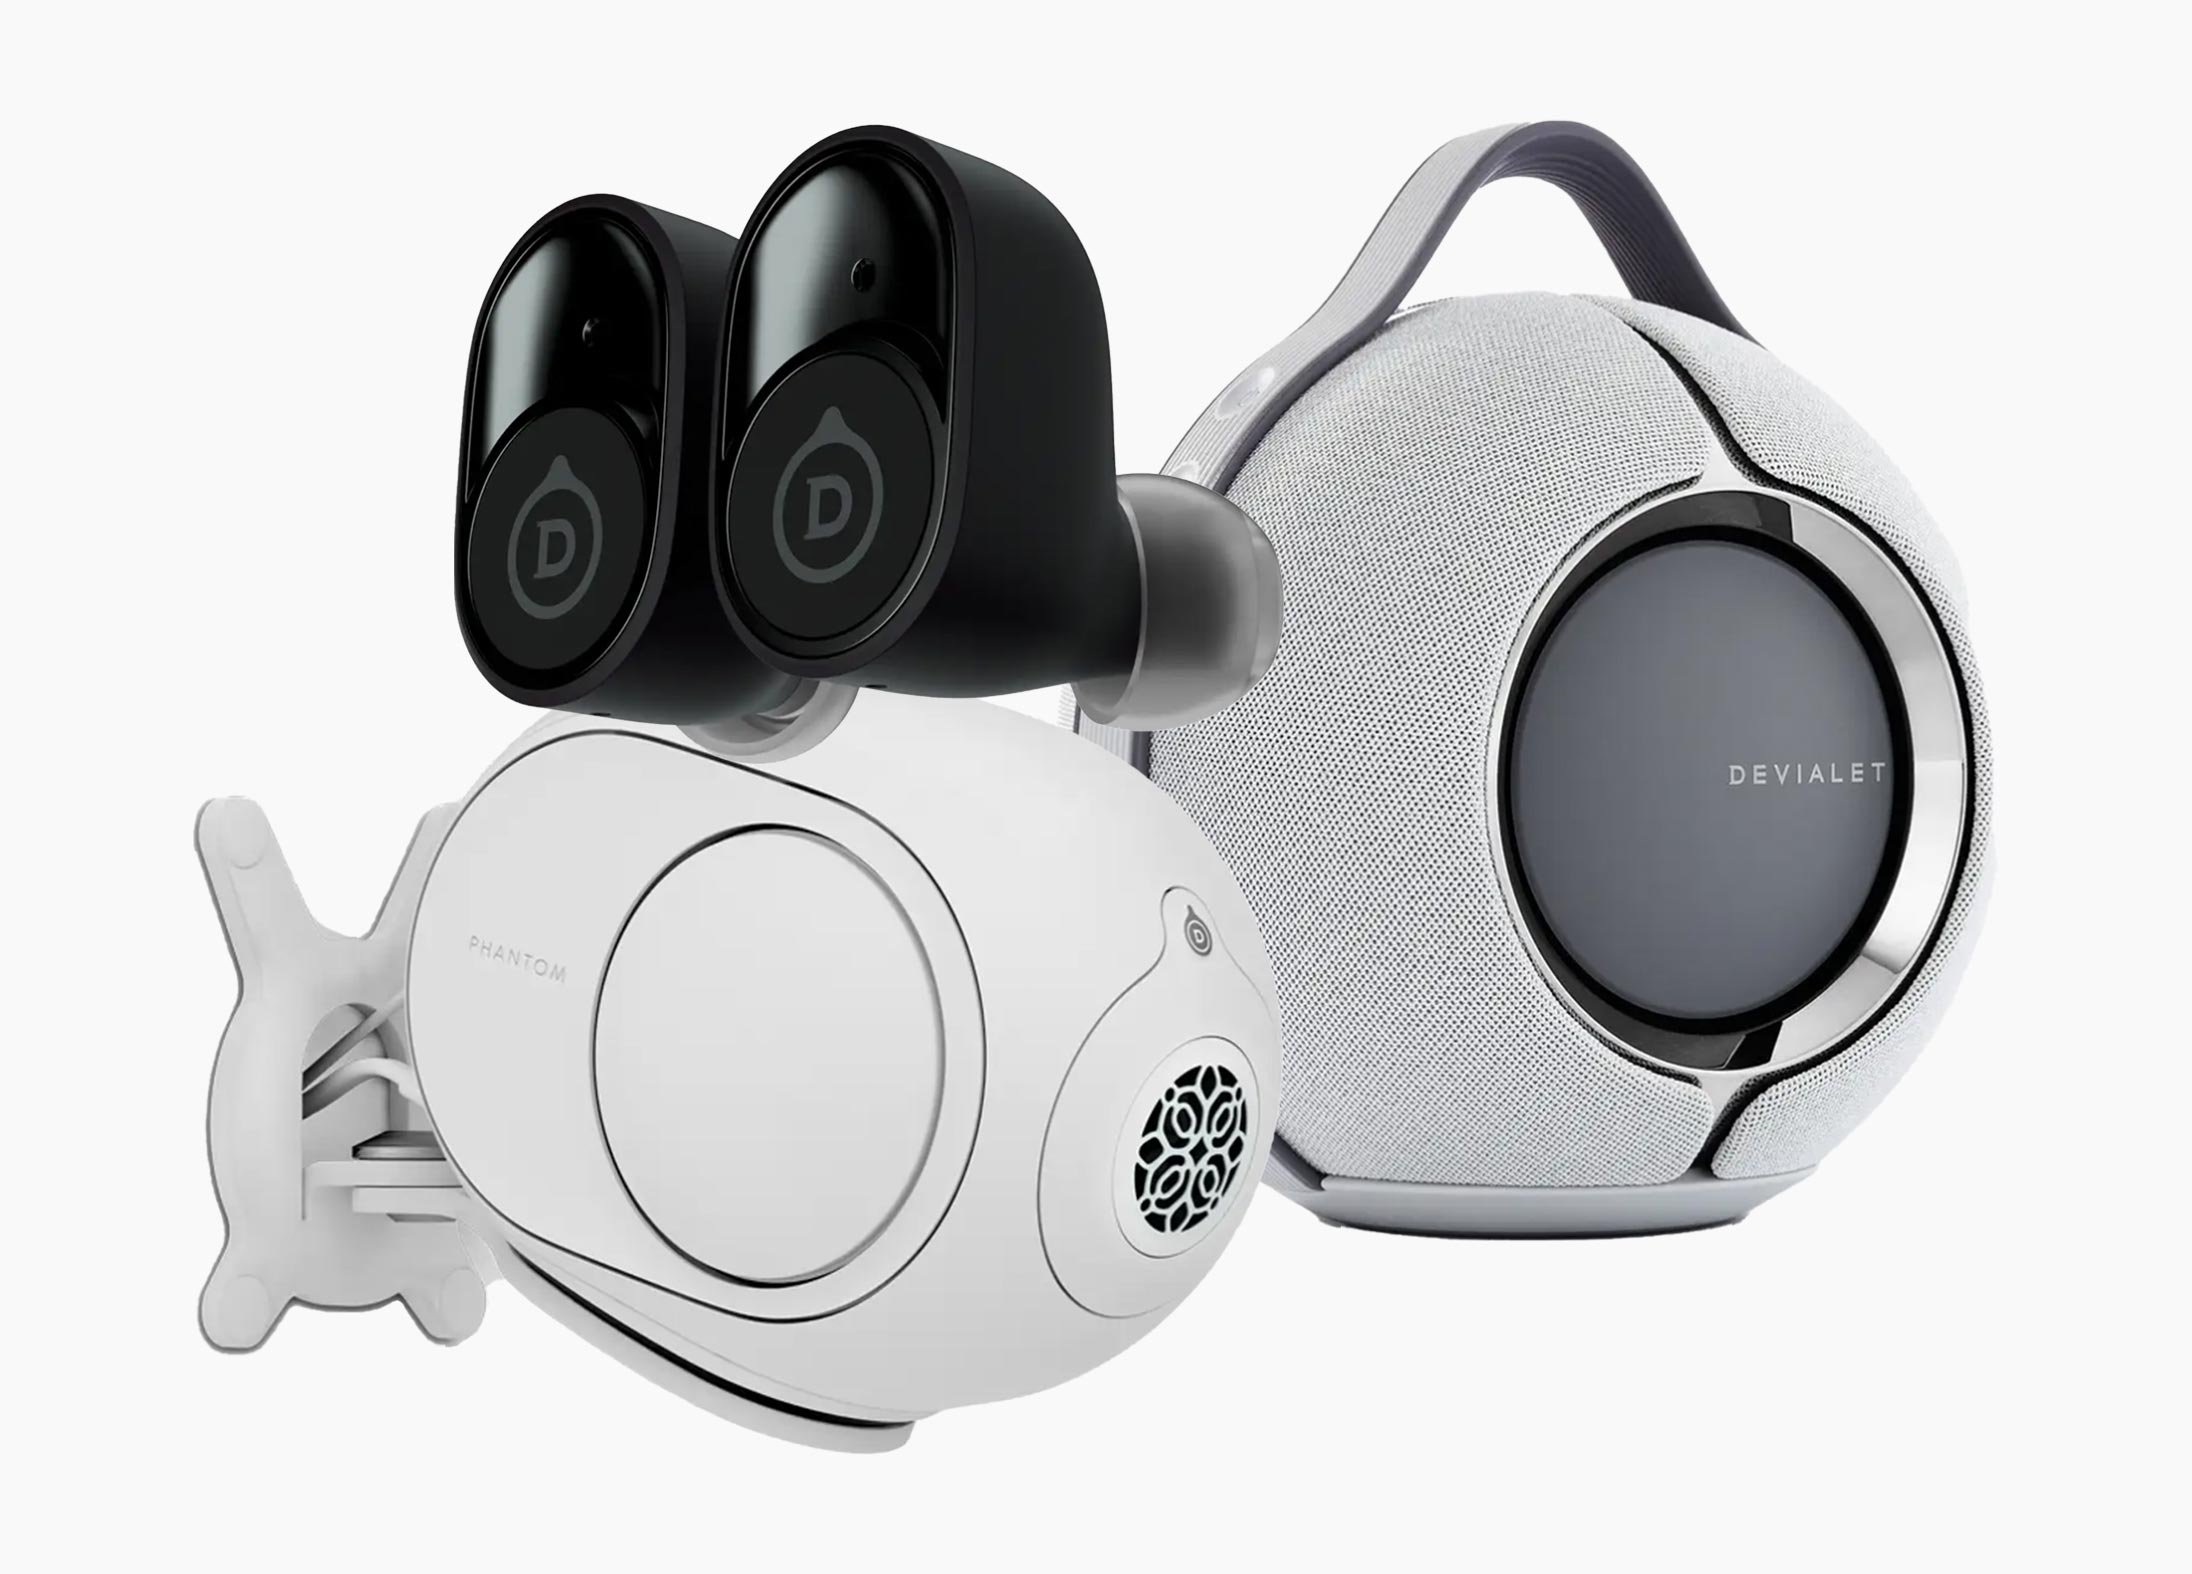 Gift ideas from Devialet Pacific Place